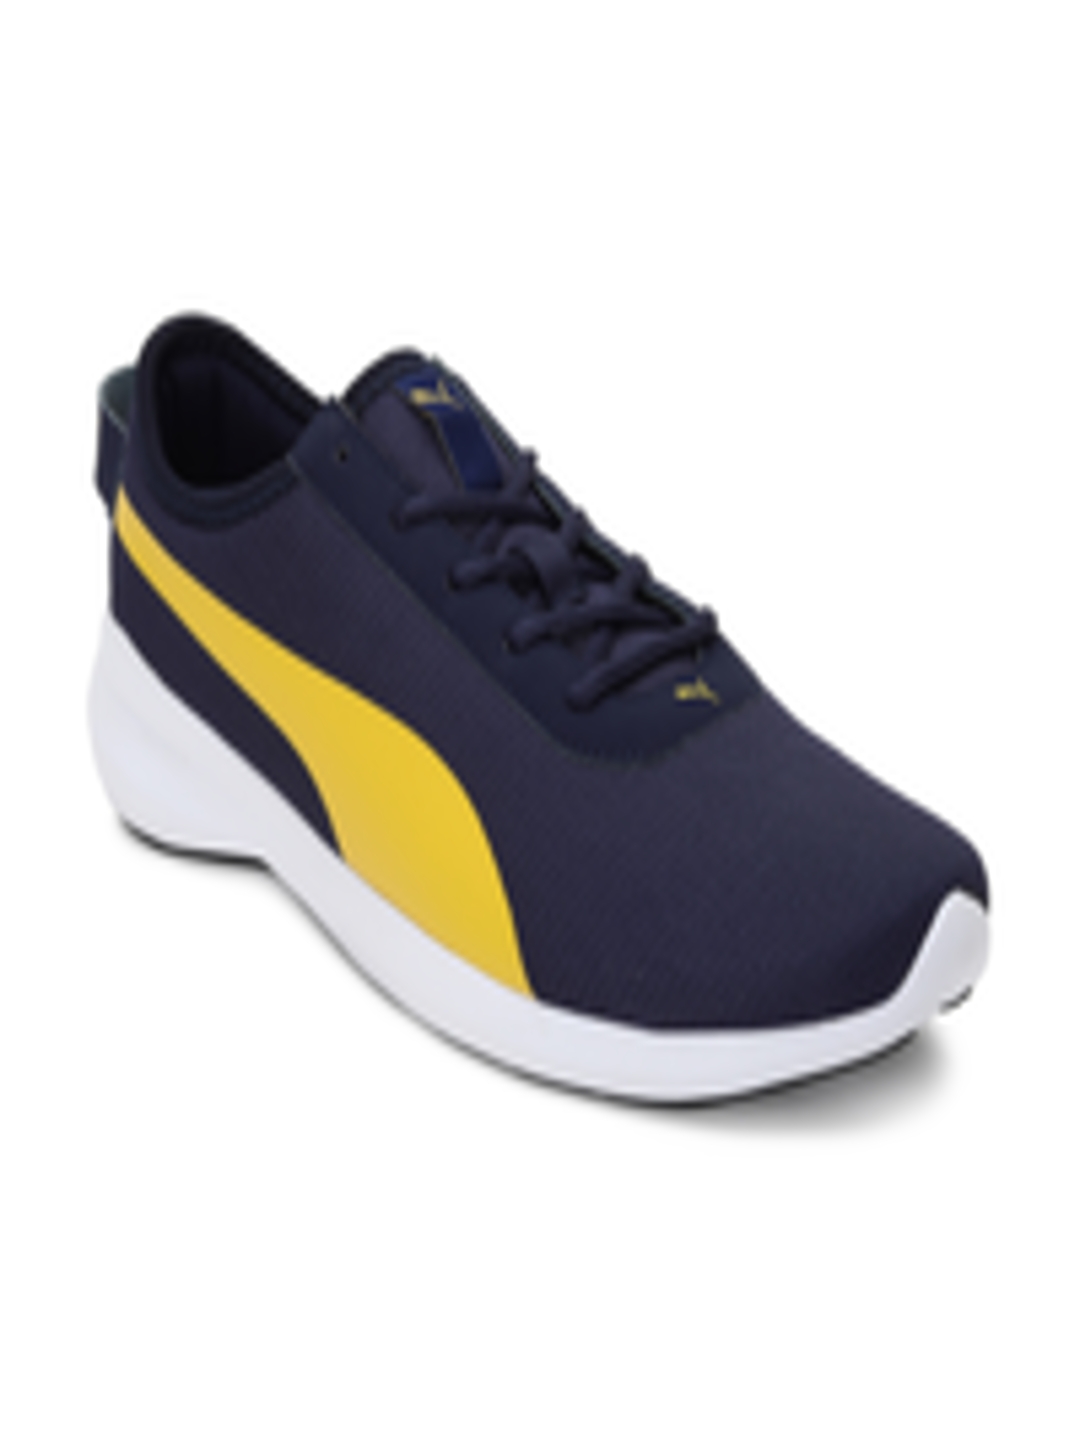 Buy Puma Men Navy Blue Colourblocked Pacer Gravity Shoes - Casual Shoes ...